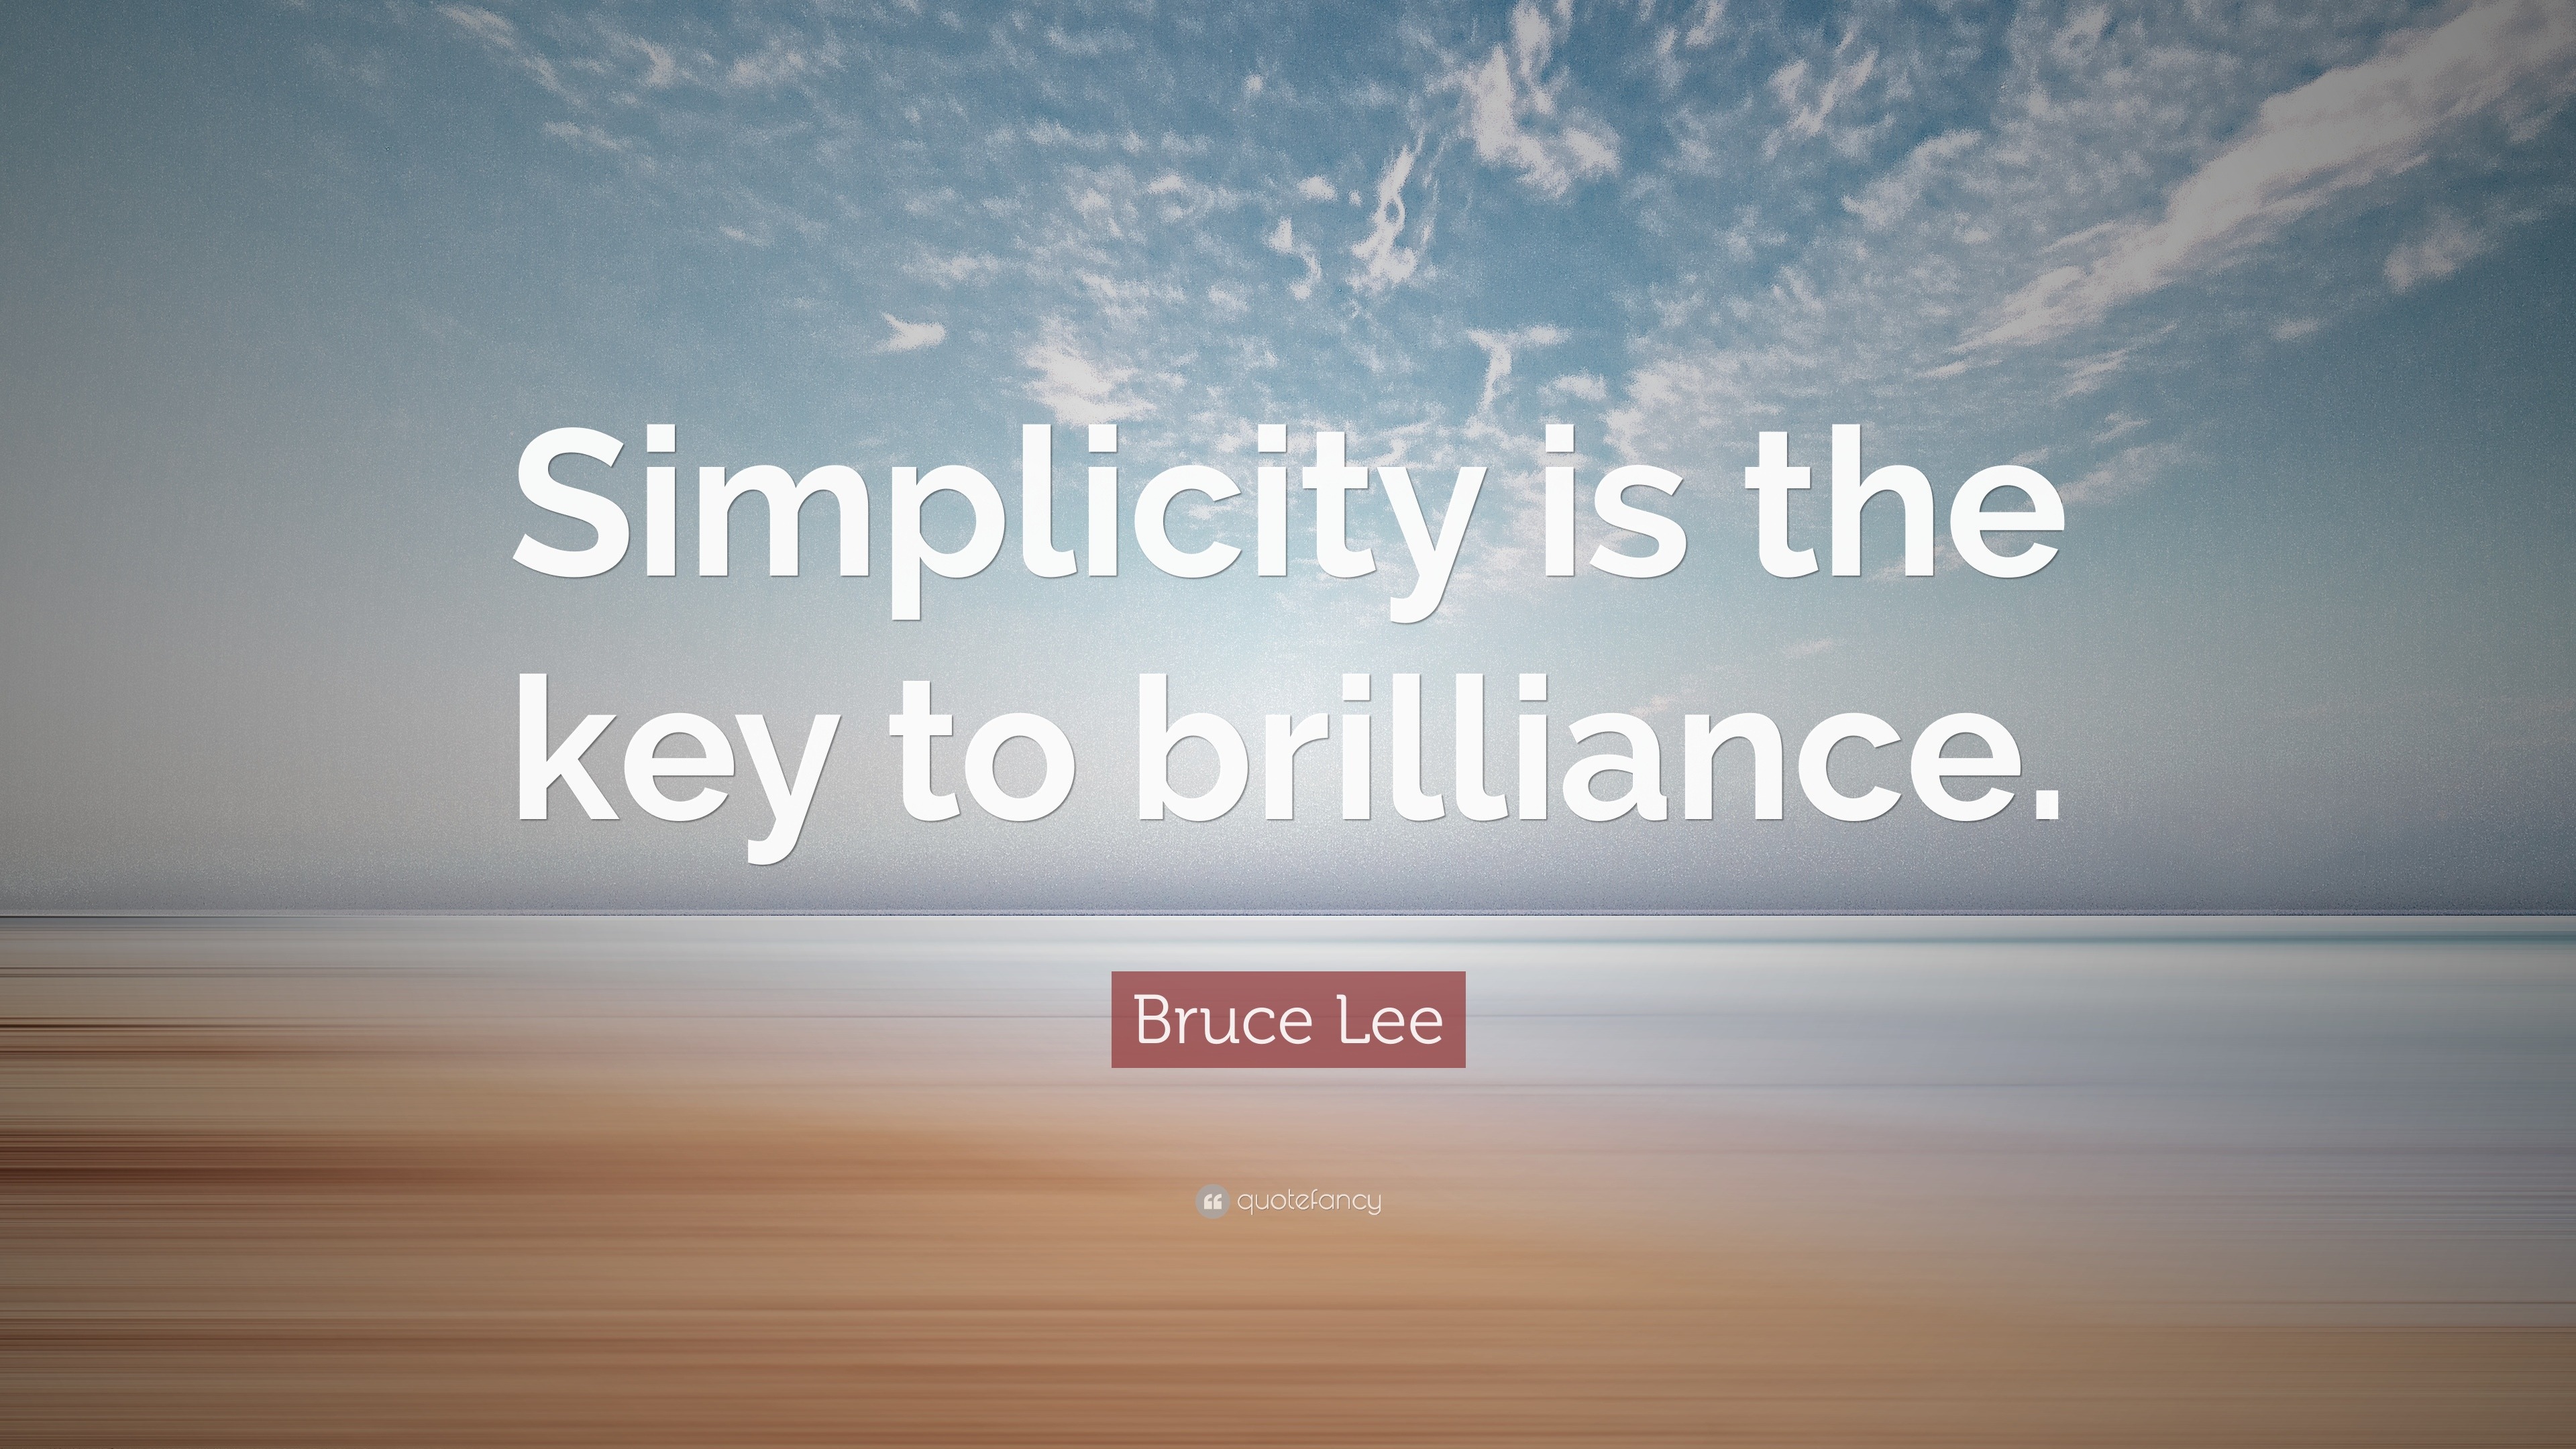 Bruce Lee Quote: “Simplicity is the key to brilliance.” (12 wallpapers